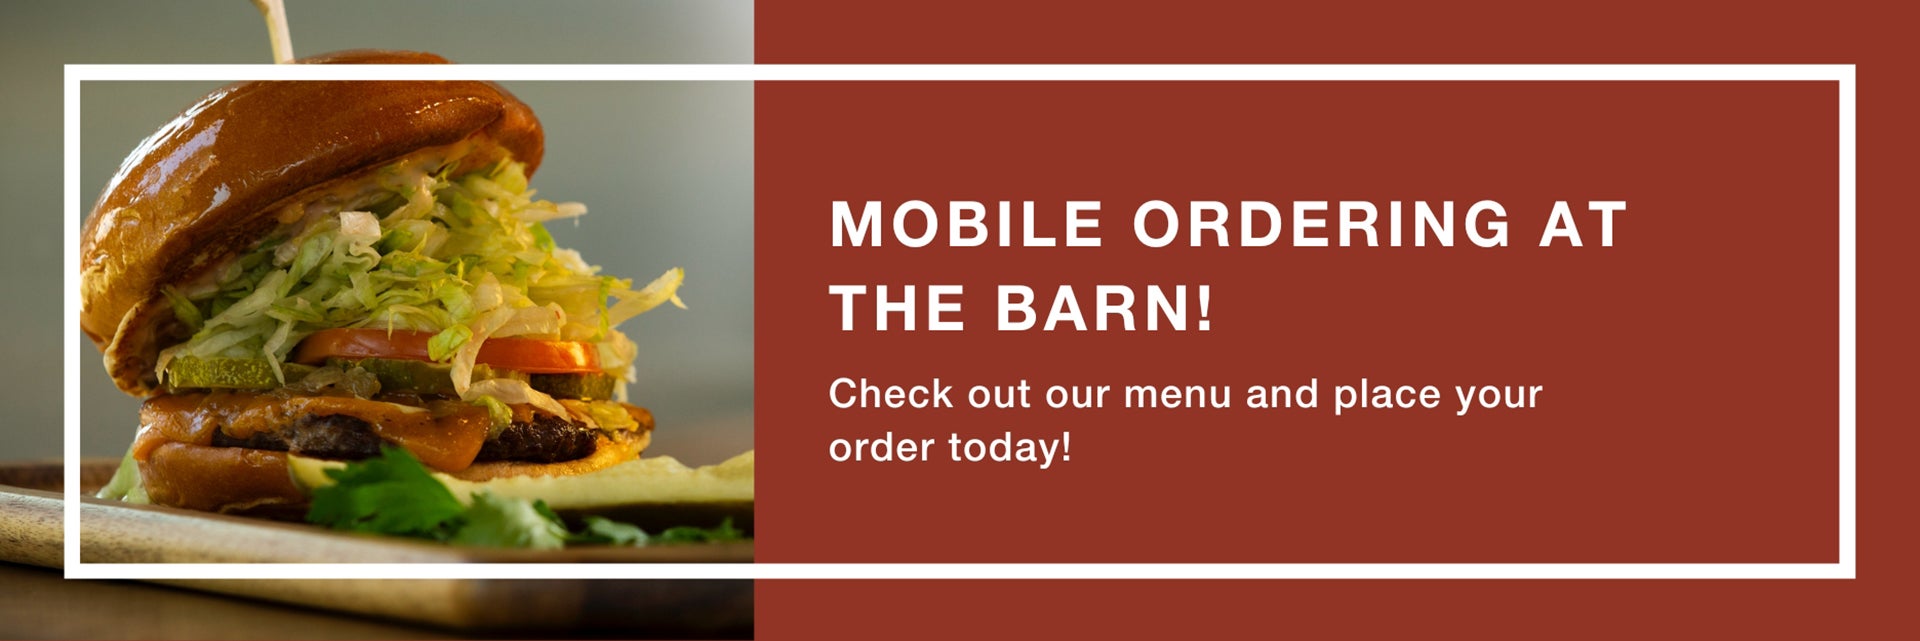 Mobile Ordering At The Barn